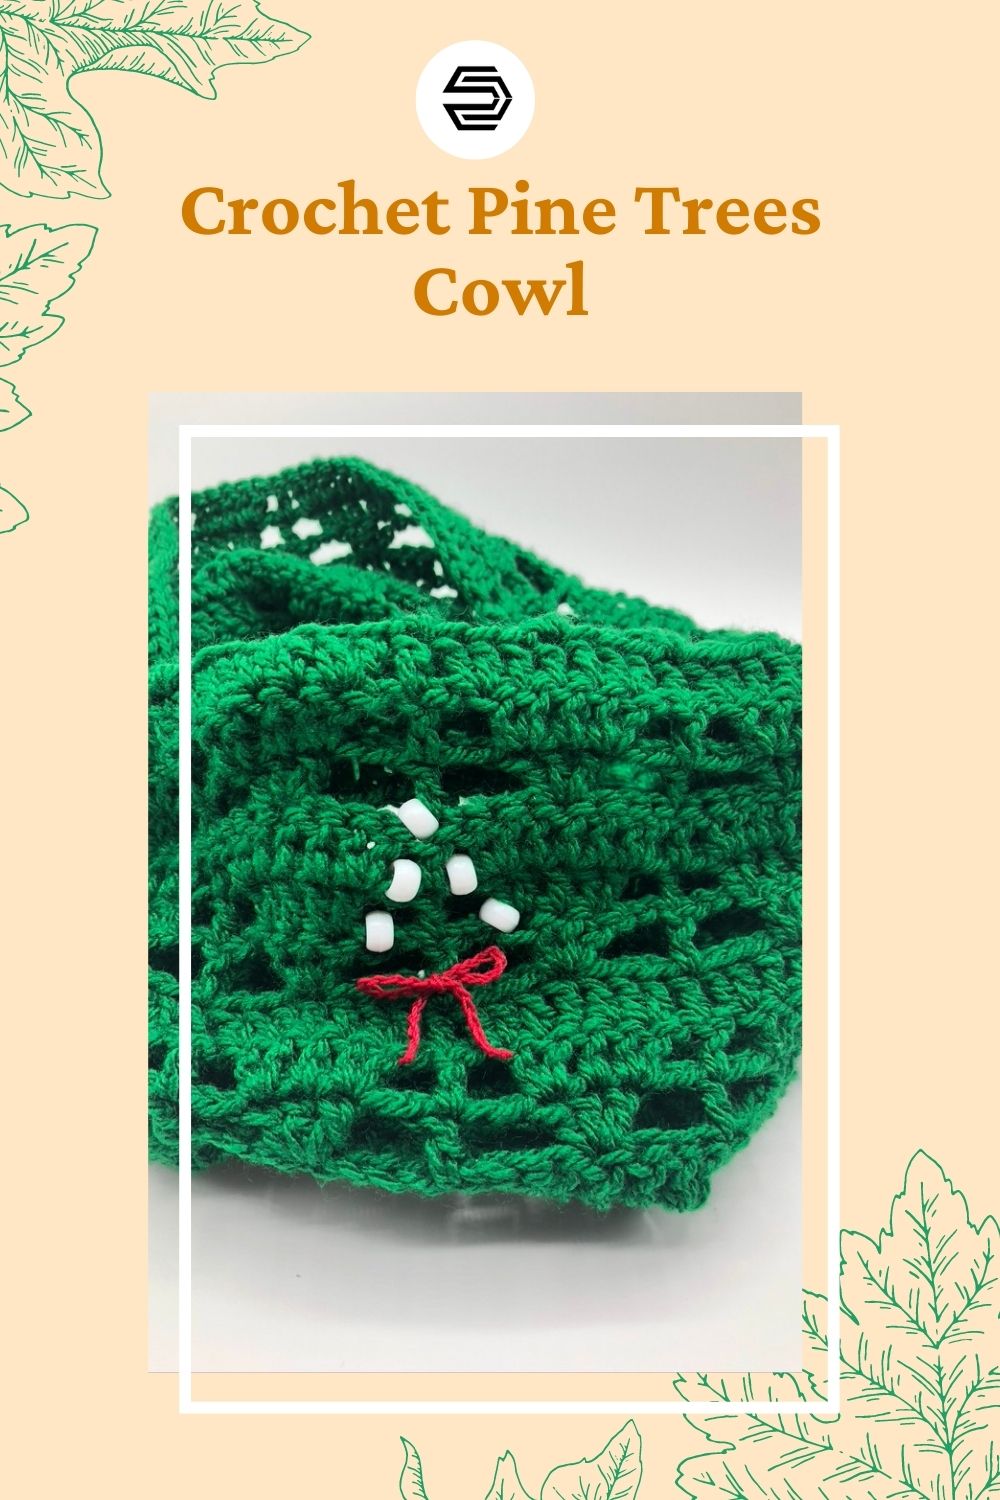 The Pine Trees Cowl is a quick, one skein, free crochet pattern. It’s available in one size , but can be adjusted for different sizes. This is a great cowl to gift and make in any color for the whole family.